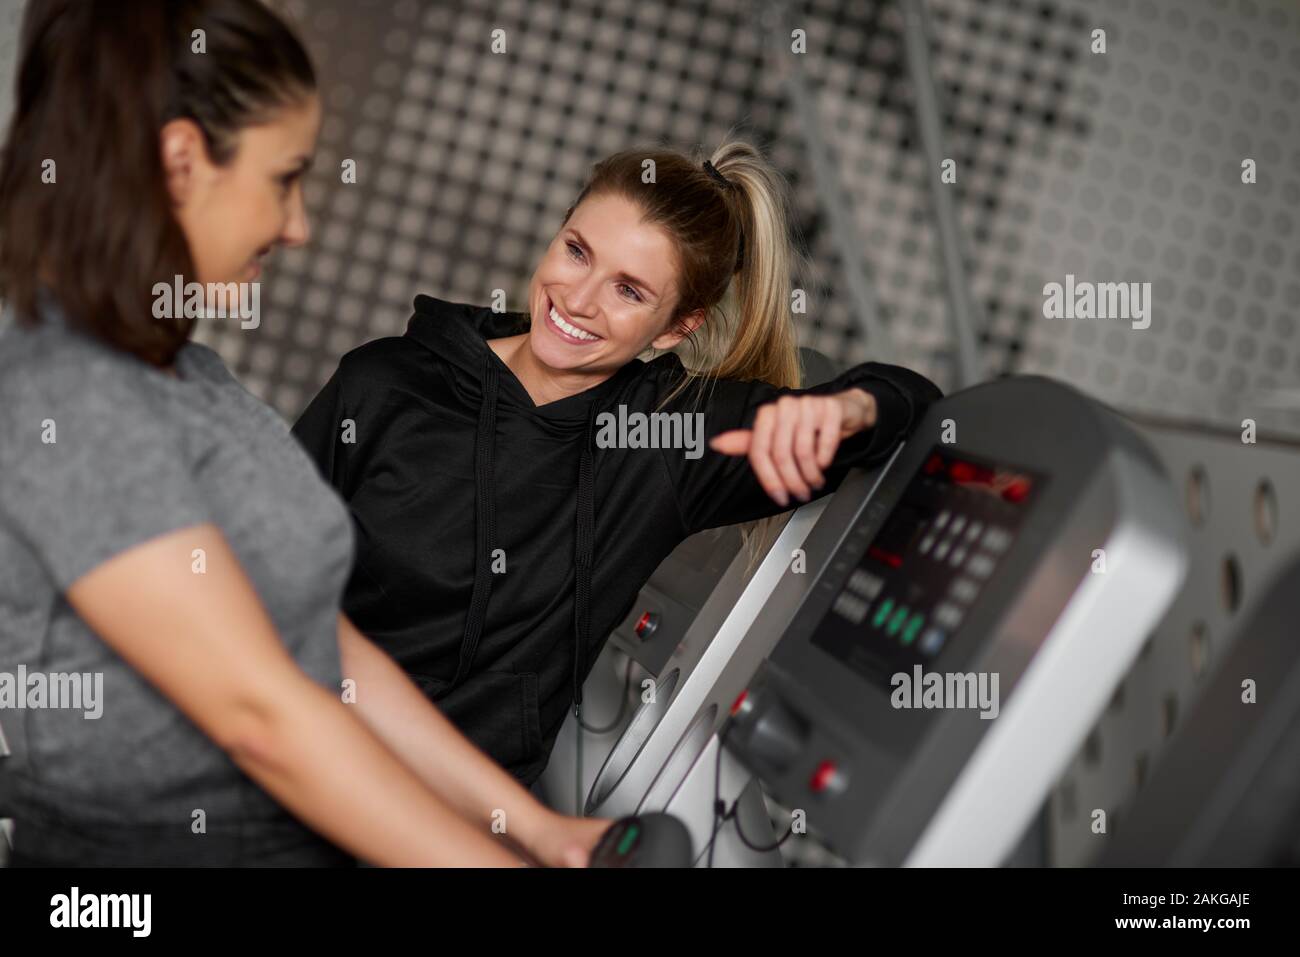 Fitness instructor and woman having a chat Stock Photo